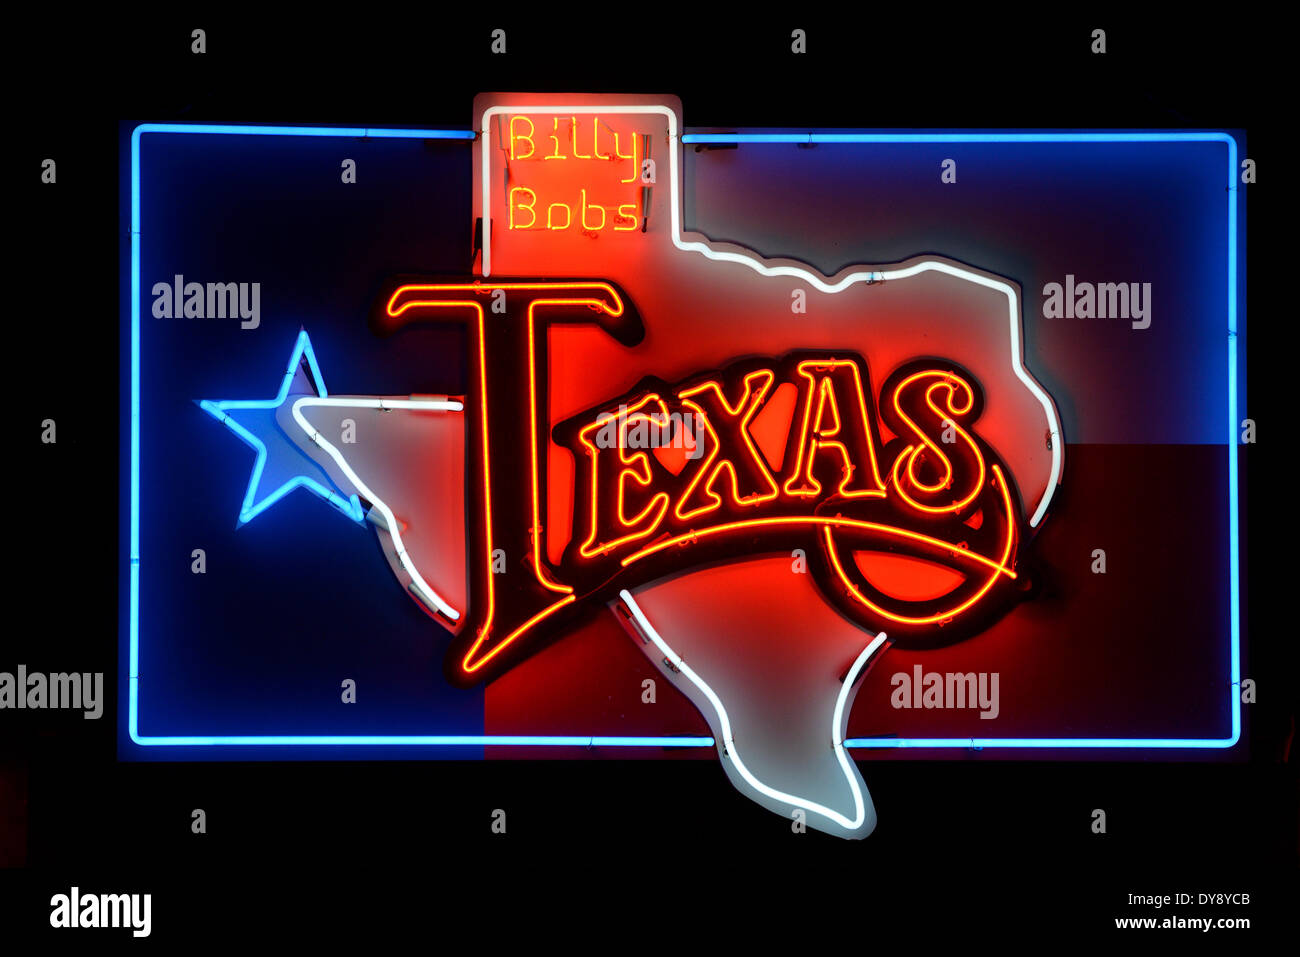 USA, United States, America, America, Texas, Fort Worth, Neon sign, Billy Bobs, Honky Tonk, nightlife, neon, map Stock Photo